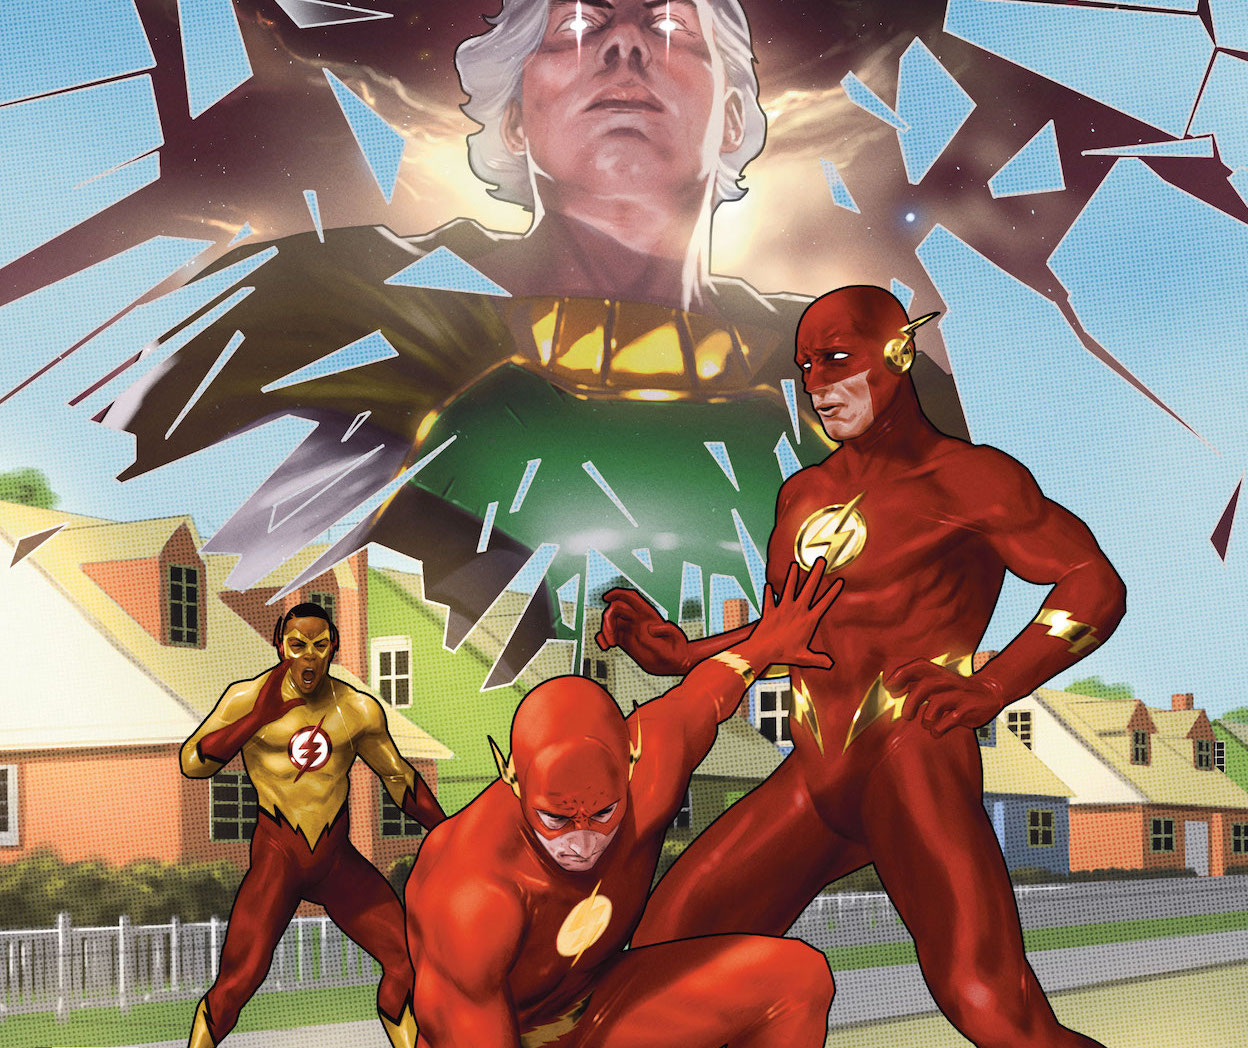 'The Flash' #784 brings the action and multiverse fun